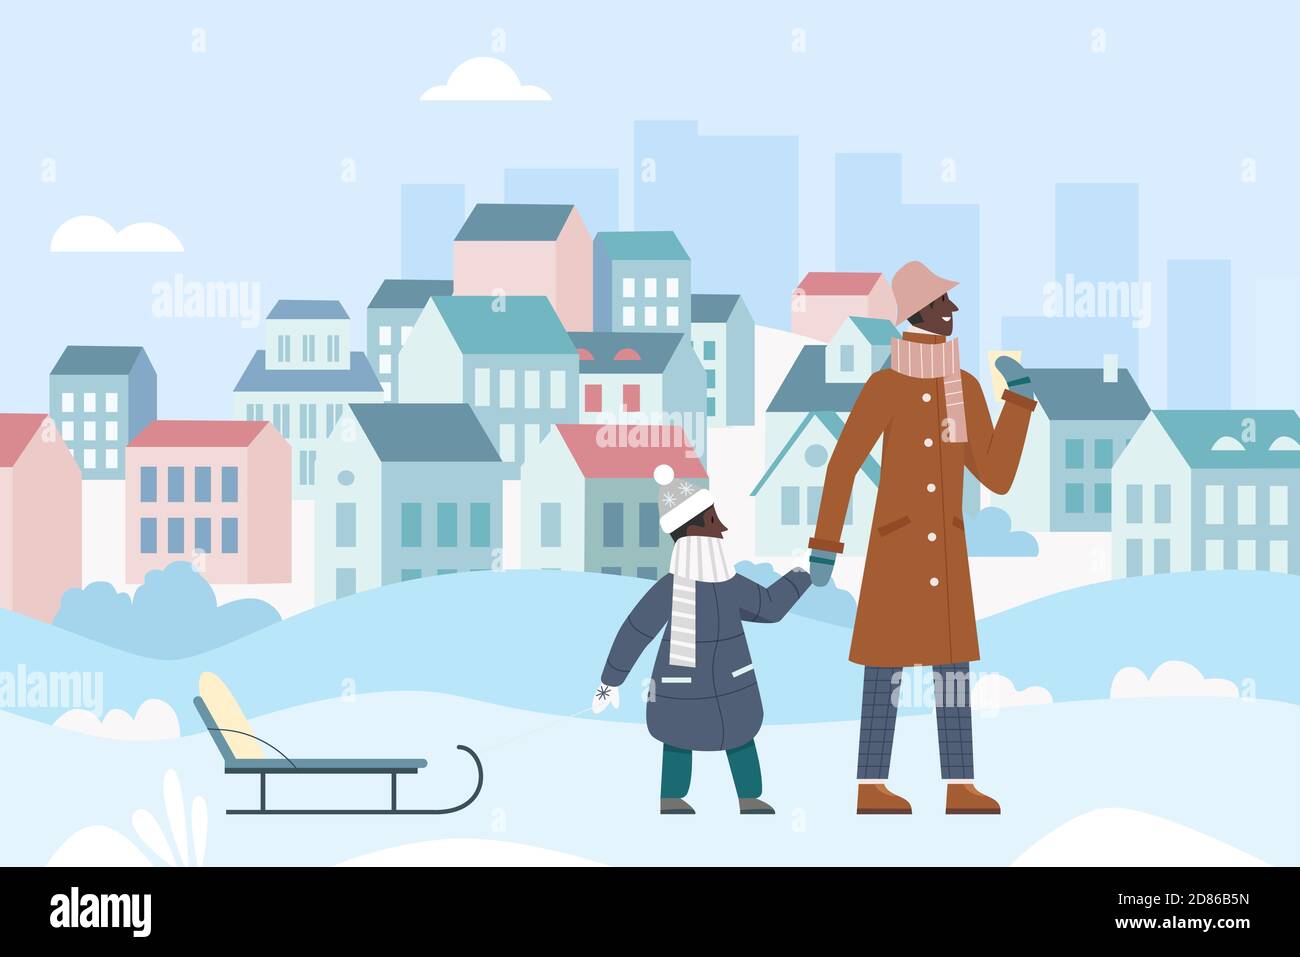 Family winter walk activity vector illustration. Cartoon active father with child walking and sledding in Christmas snowy cityscape, man holding sledge and enjoying xmas city under snow background Stock Vector